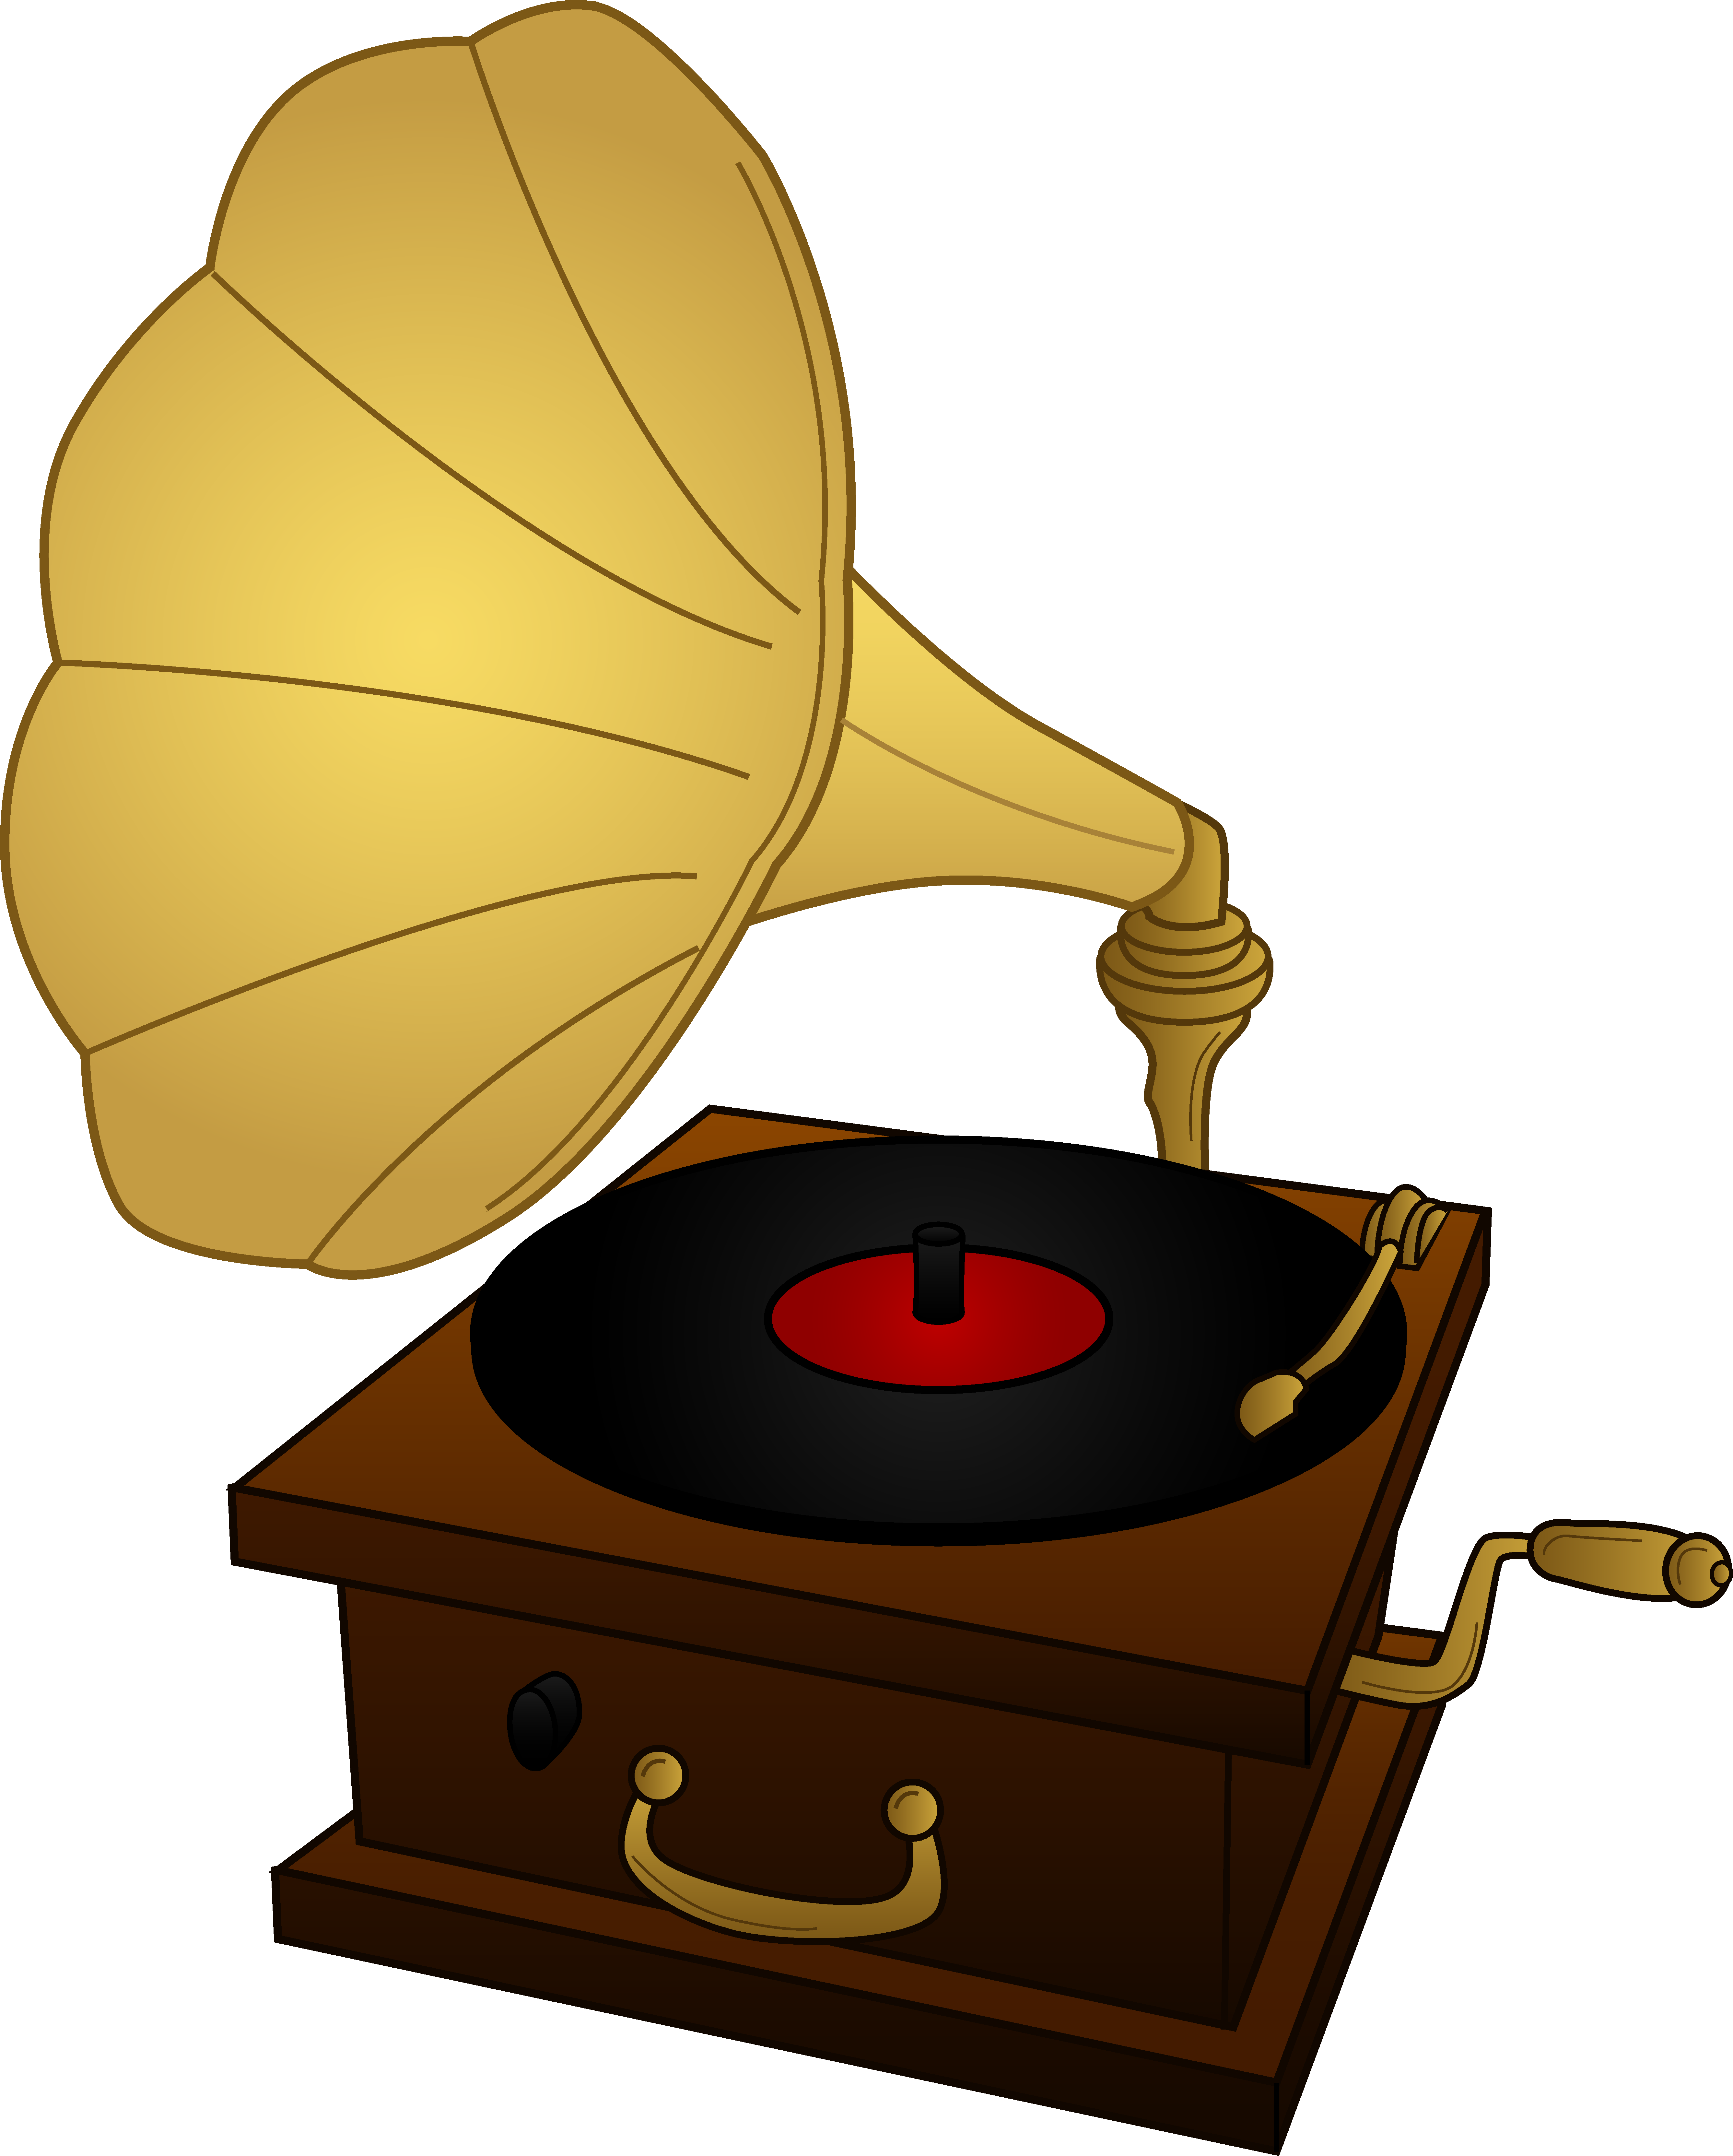 Old music player clipart